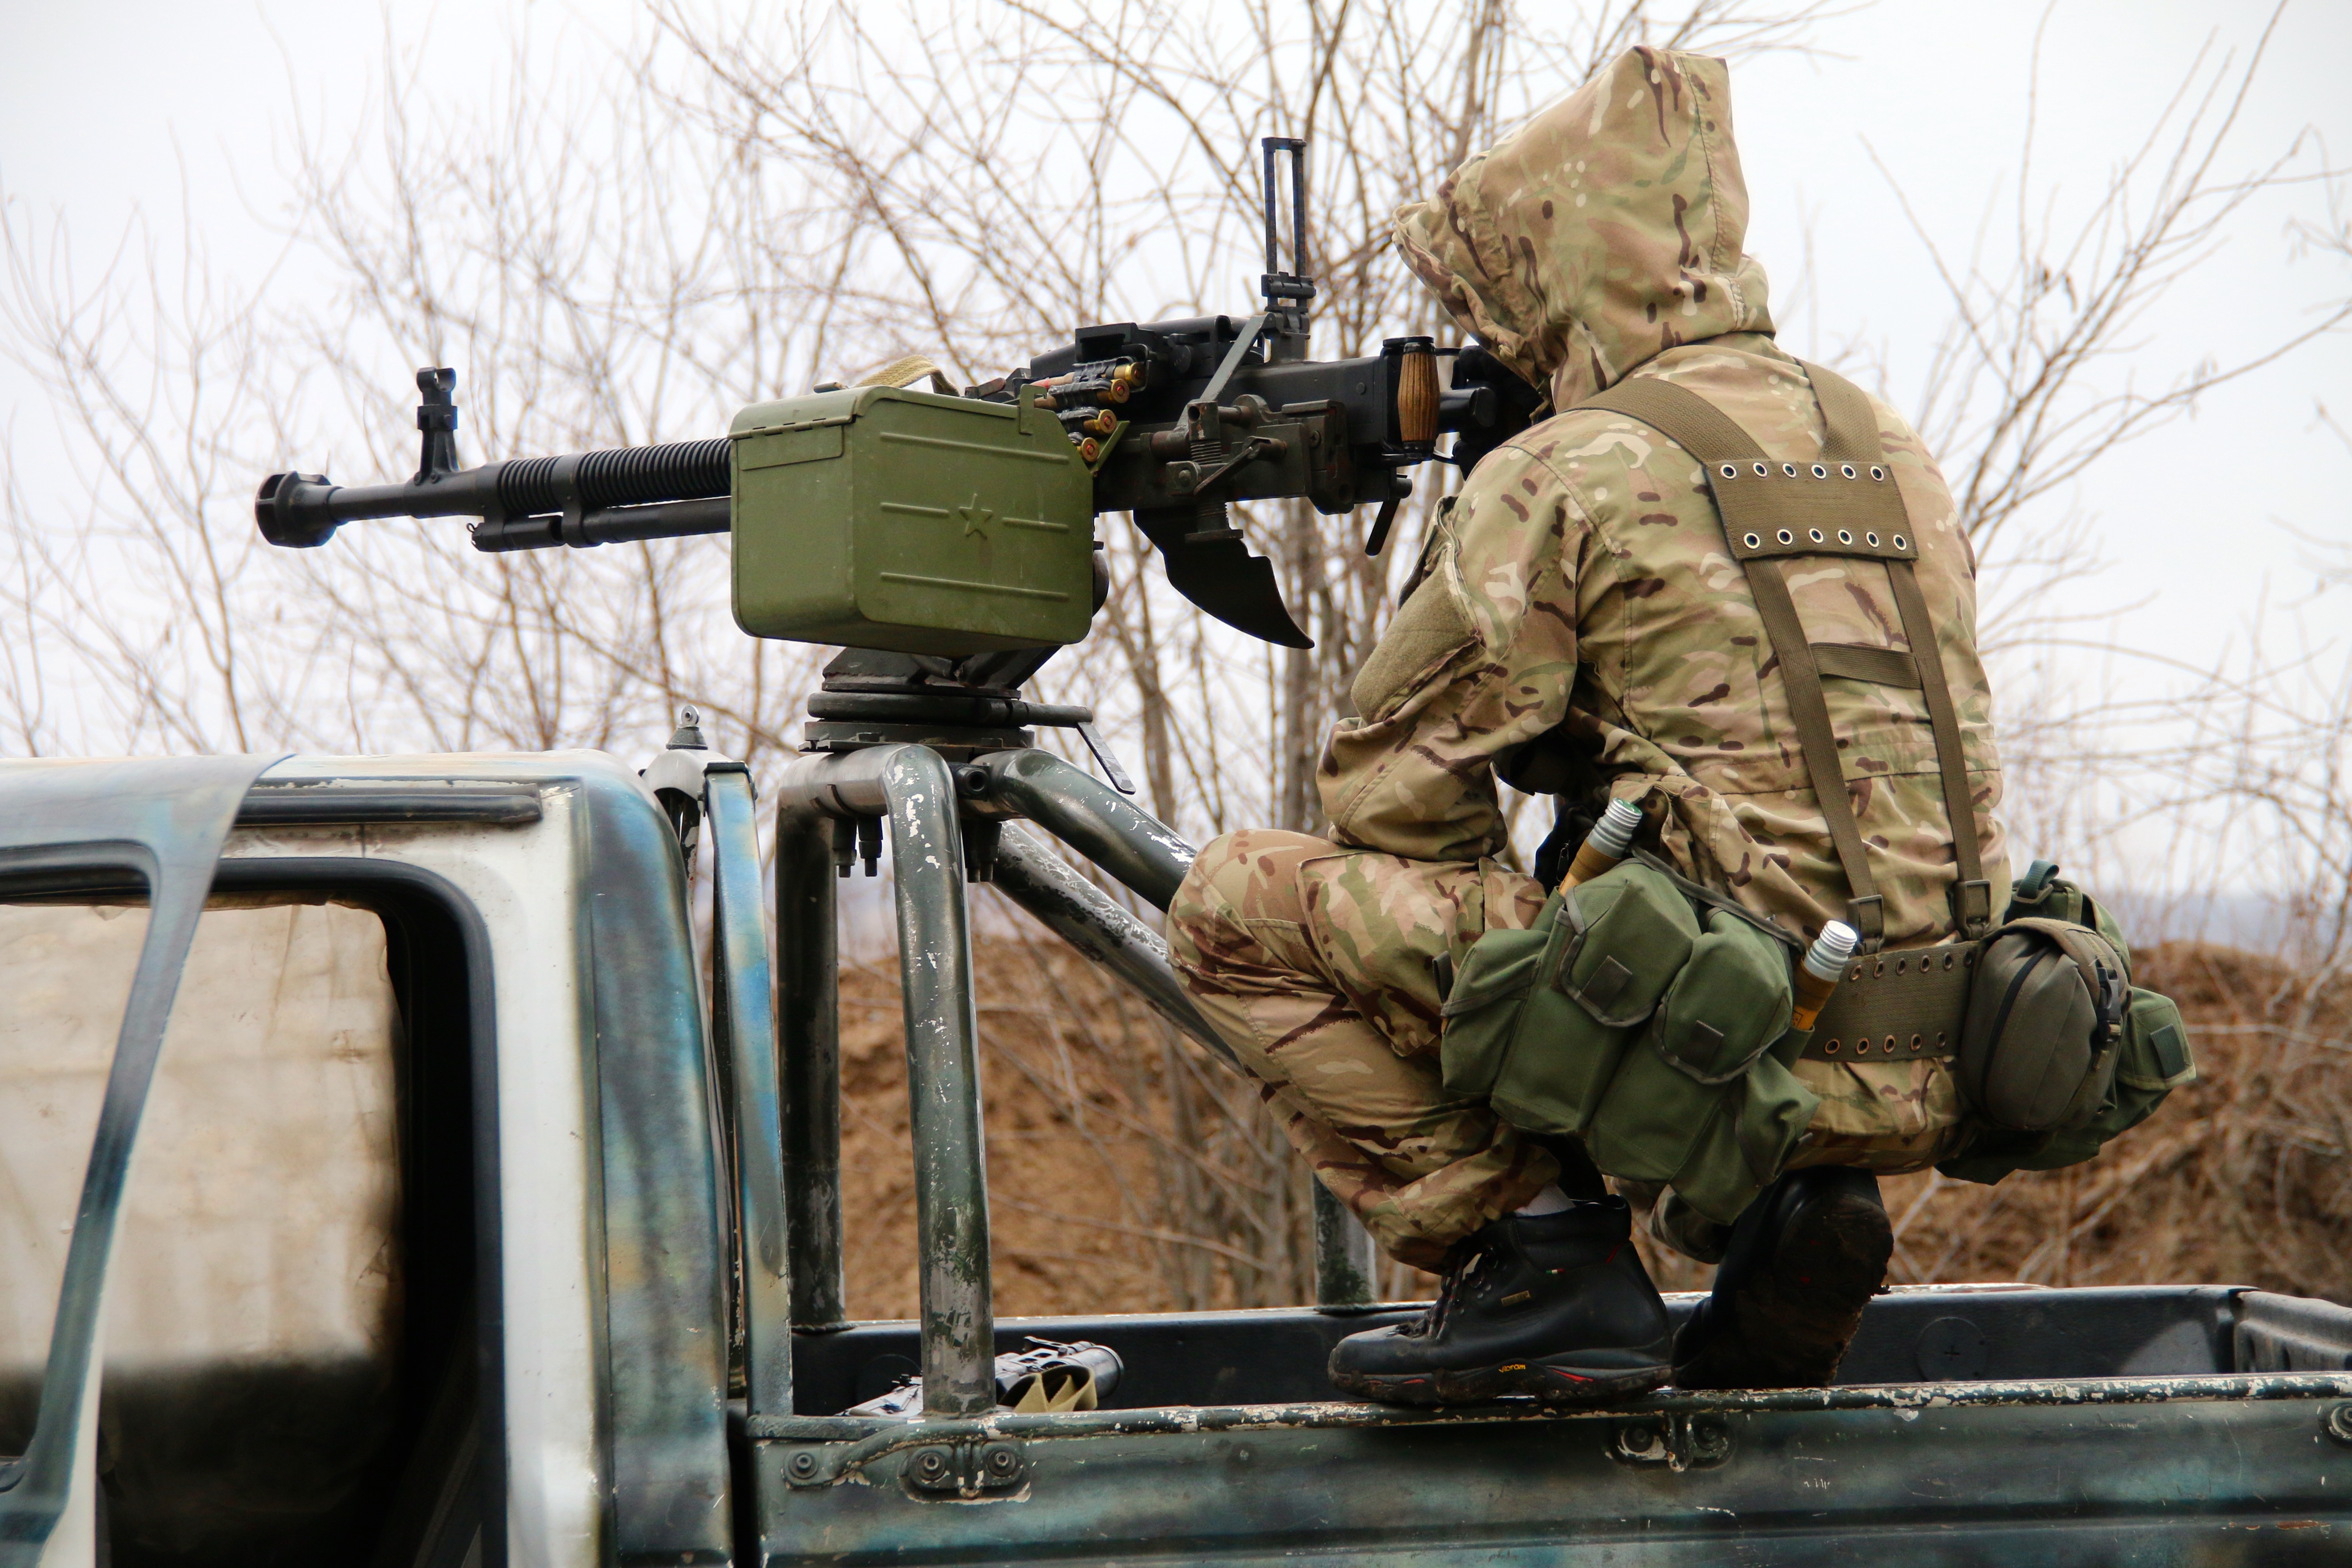 Ukrainian troops patrol no man’s land outside the town of Shchastya. (Photos: Nolan Peterson/The Daily Signal)